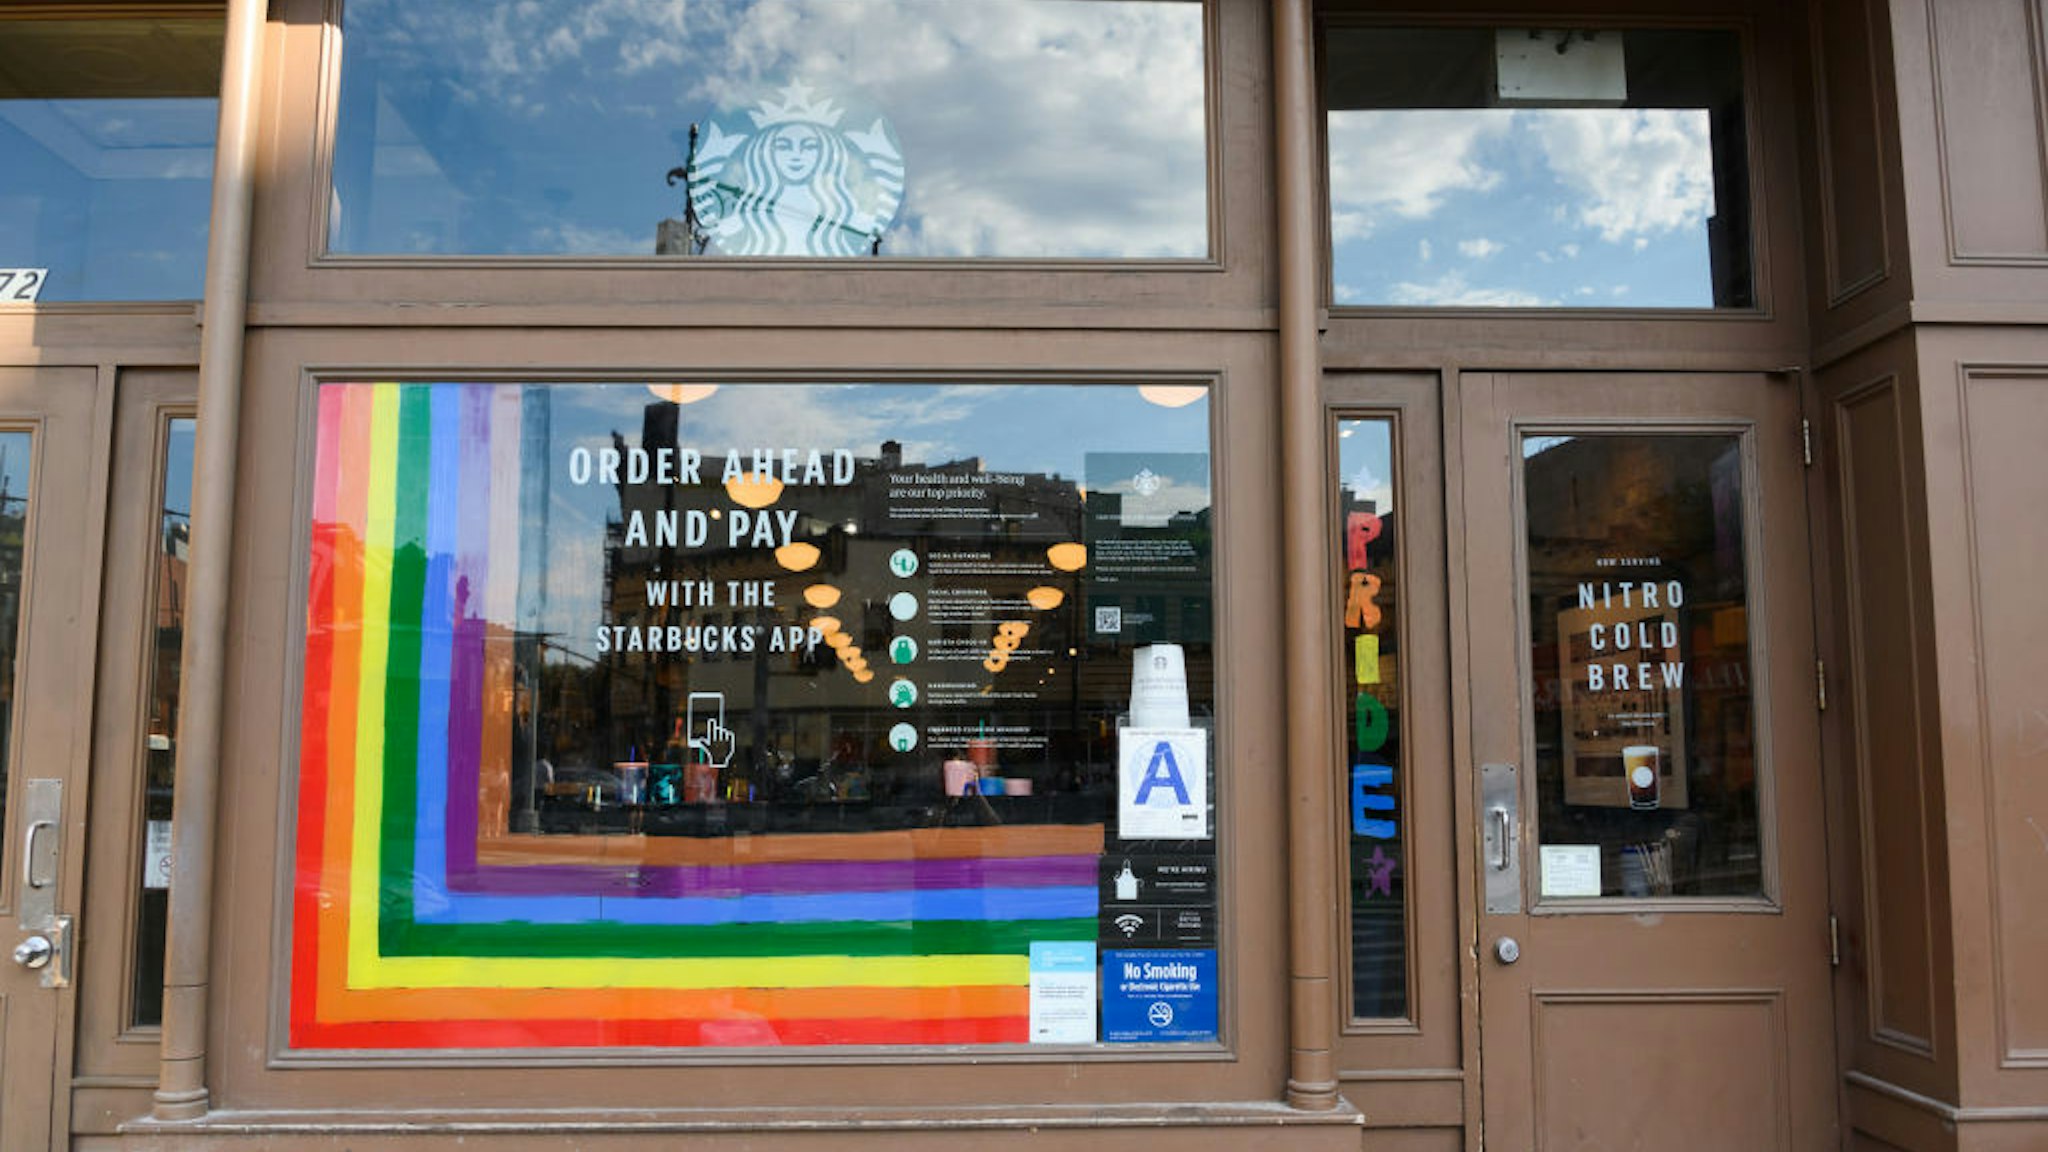 NEW YORK, NEW YORK - JUNE 26: Rainbow art is seen outside Starbucks in the West Village on June 26, 2020 in New York City. Due to the ongoing Coronavirus pandemic, this year's pride march had to be canceled over health concerns. The annual event, which sees millions of attendees, marks its 50th anniversary since the first march following the Stonewall Inn riots. (Photo by Noam Galai/Getty Images)